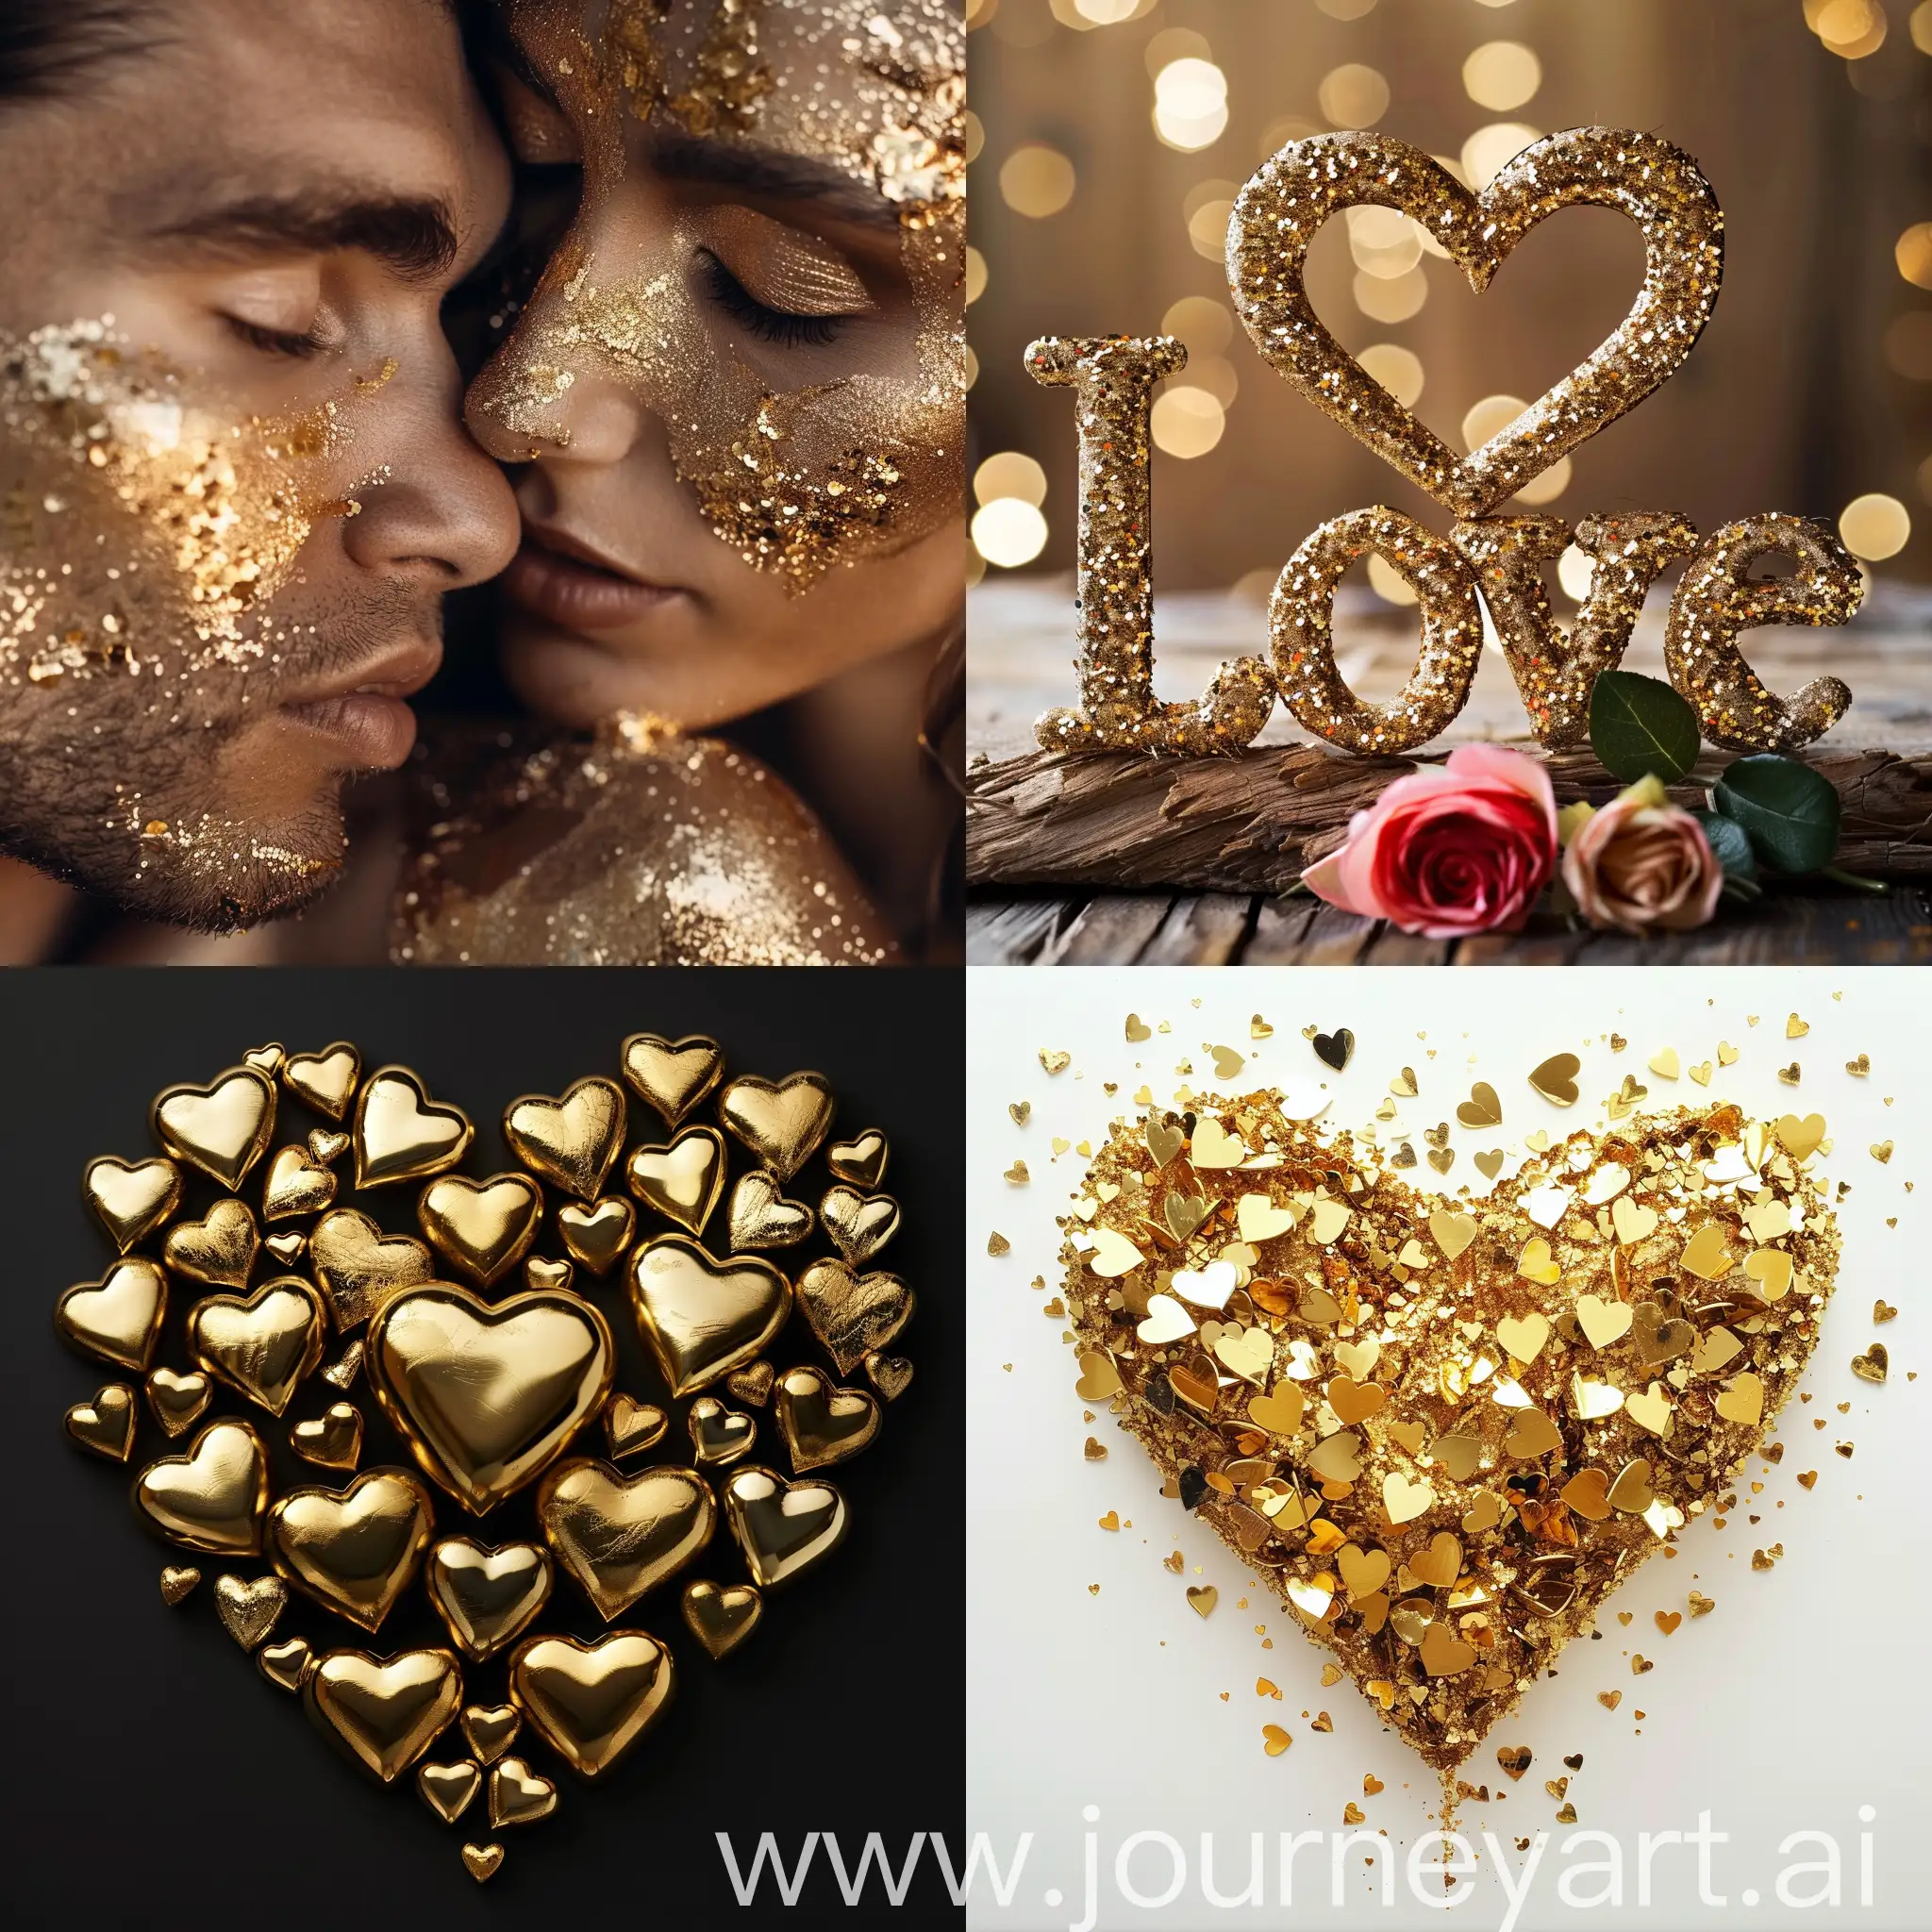 Golden-Love-Symbolic-Representation-of-Aspirations-and-Beauty-Standards